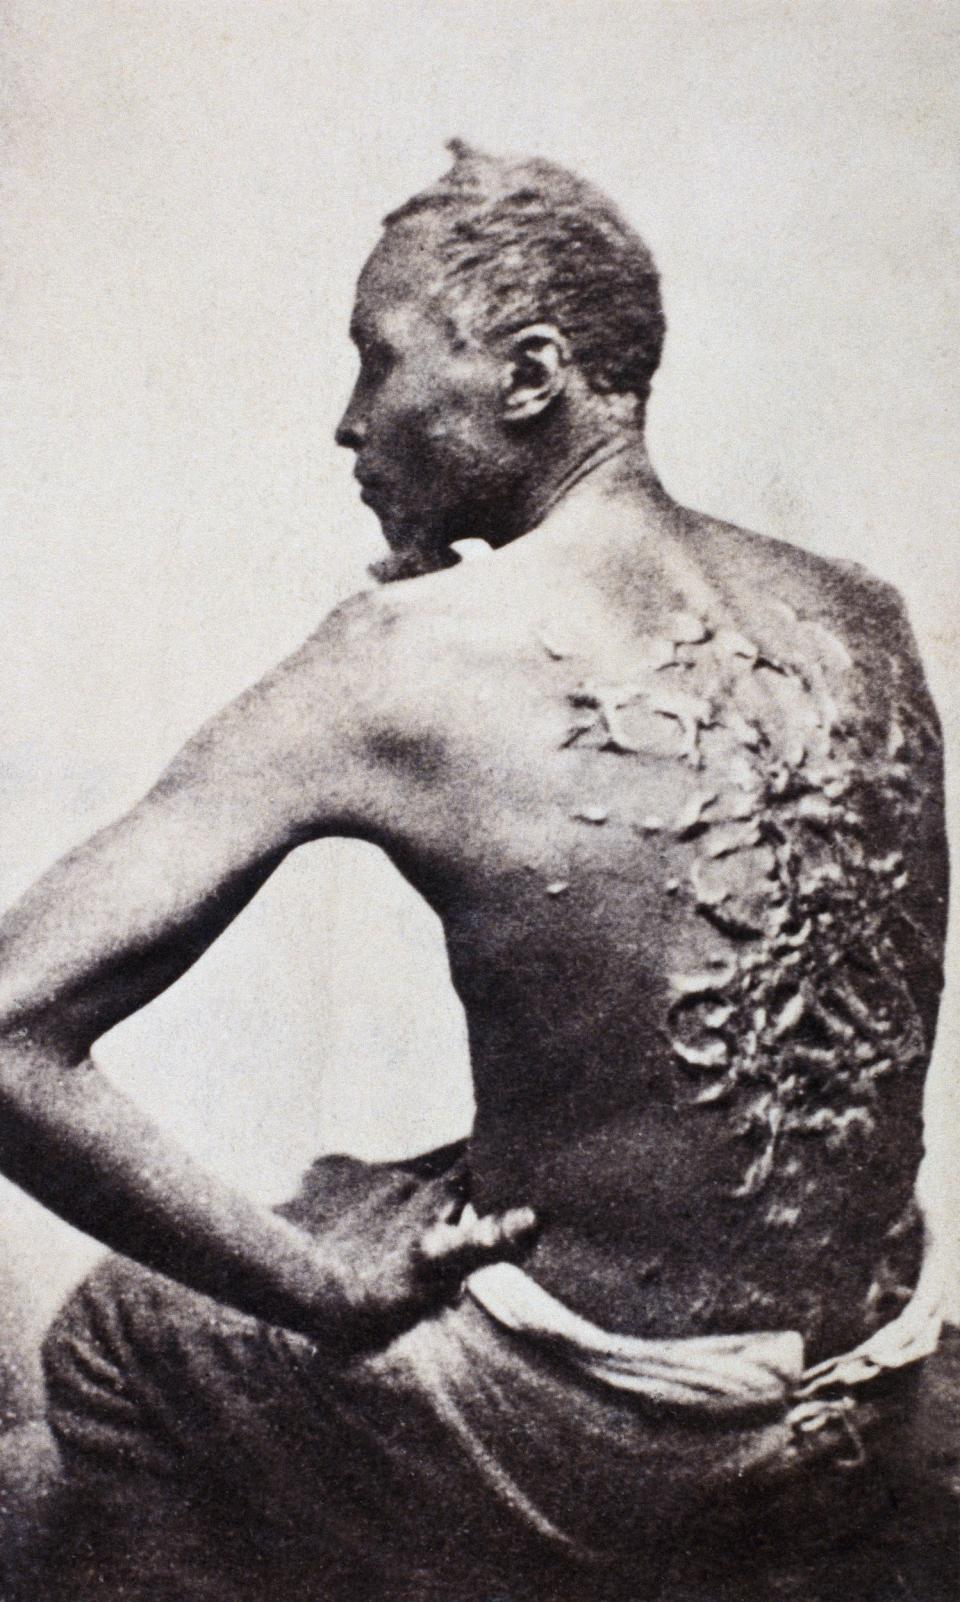 Gordon, also known as "Whipped Peter", a former enslaved man